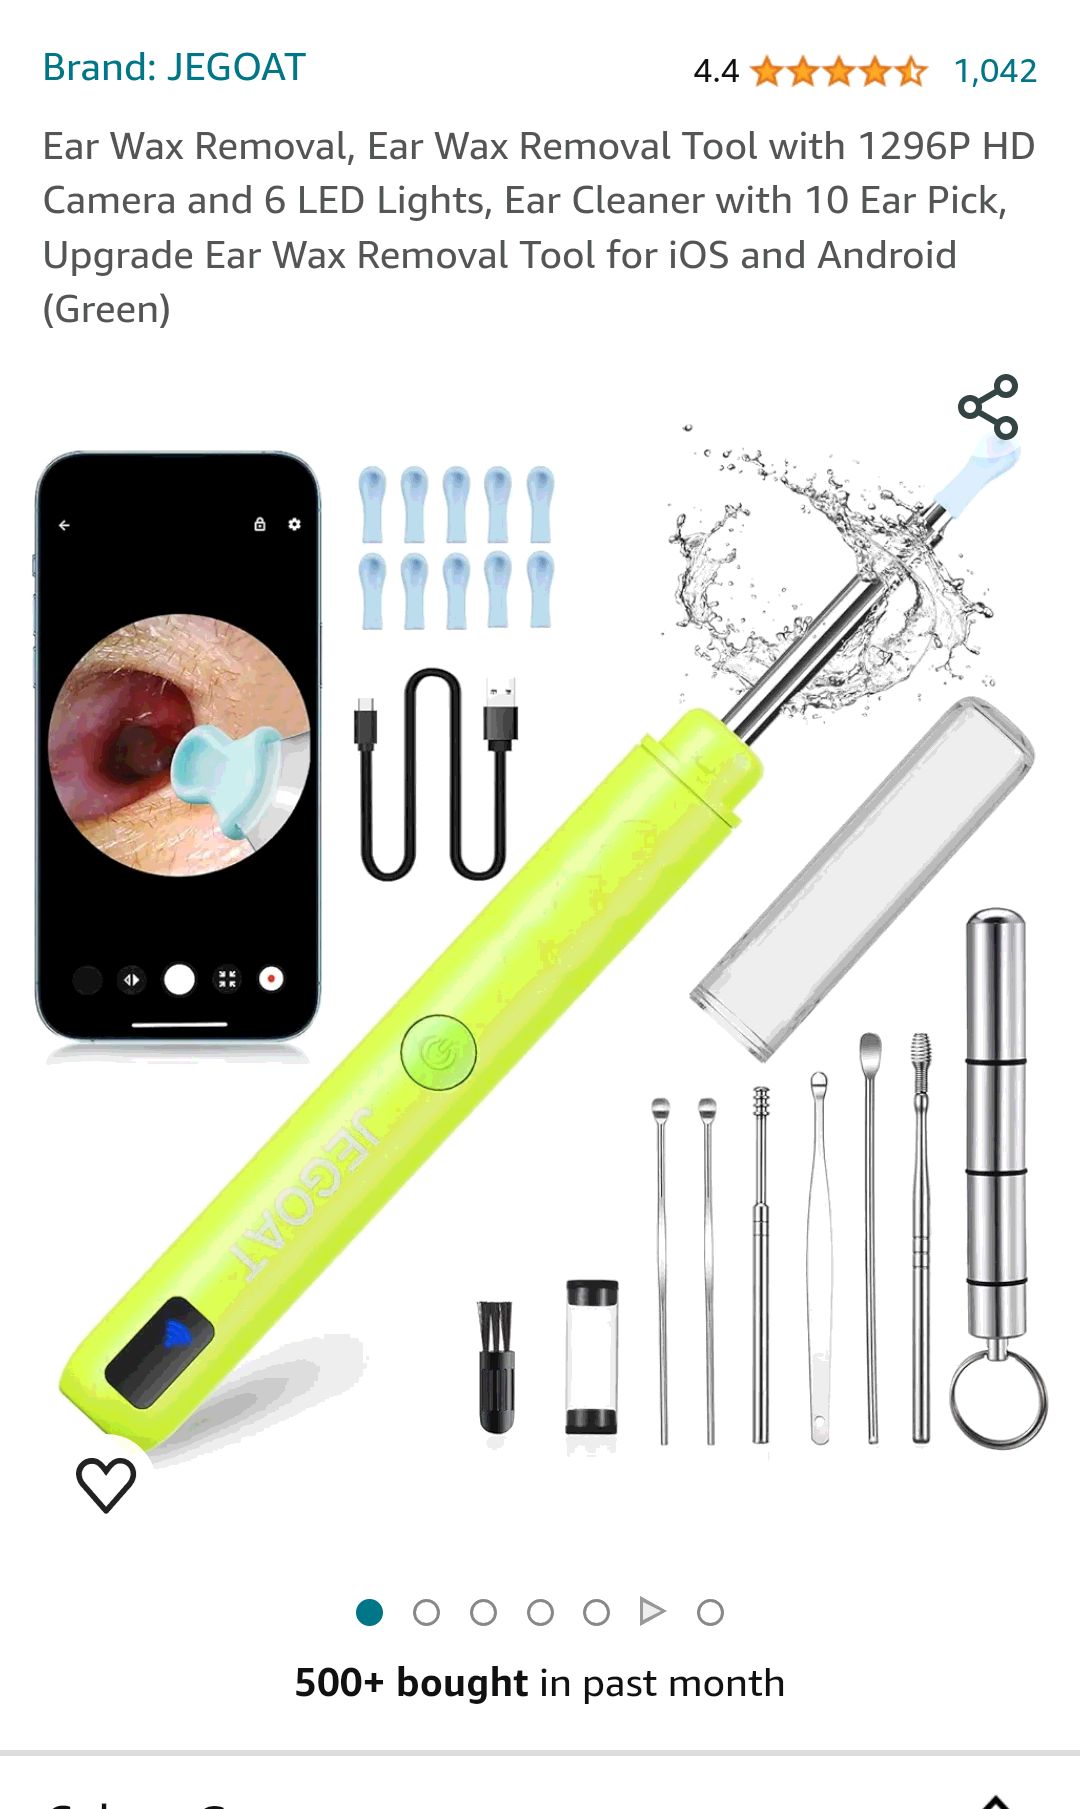 Ear Wax Removal, Ear Wax Removal Tool with 1296P HD Camera and 6 LED Lights, Ear Cleaner with 10 Ear Pick, Upgrade Ear Wax Removal Tool for iOS and Android (Deep Grey) : Health & Household